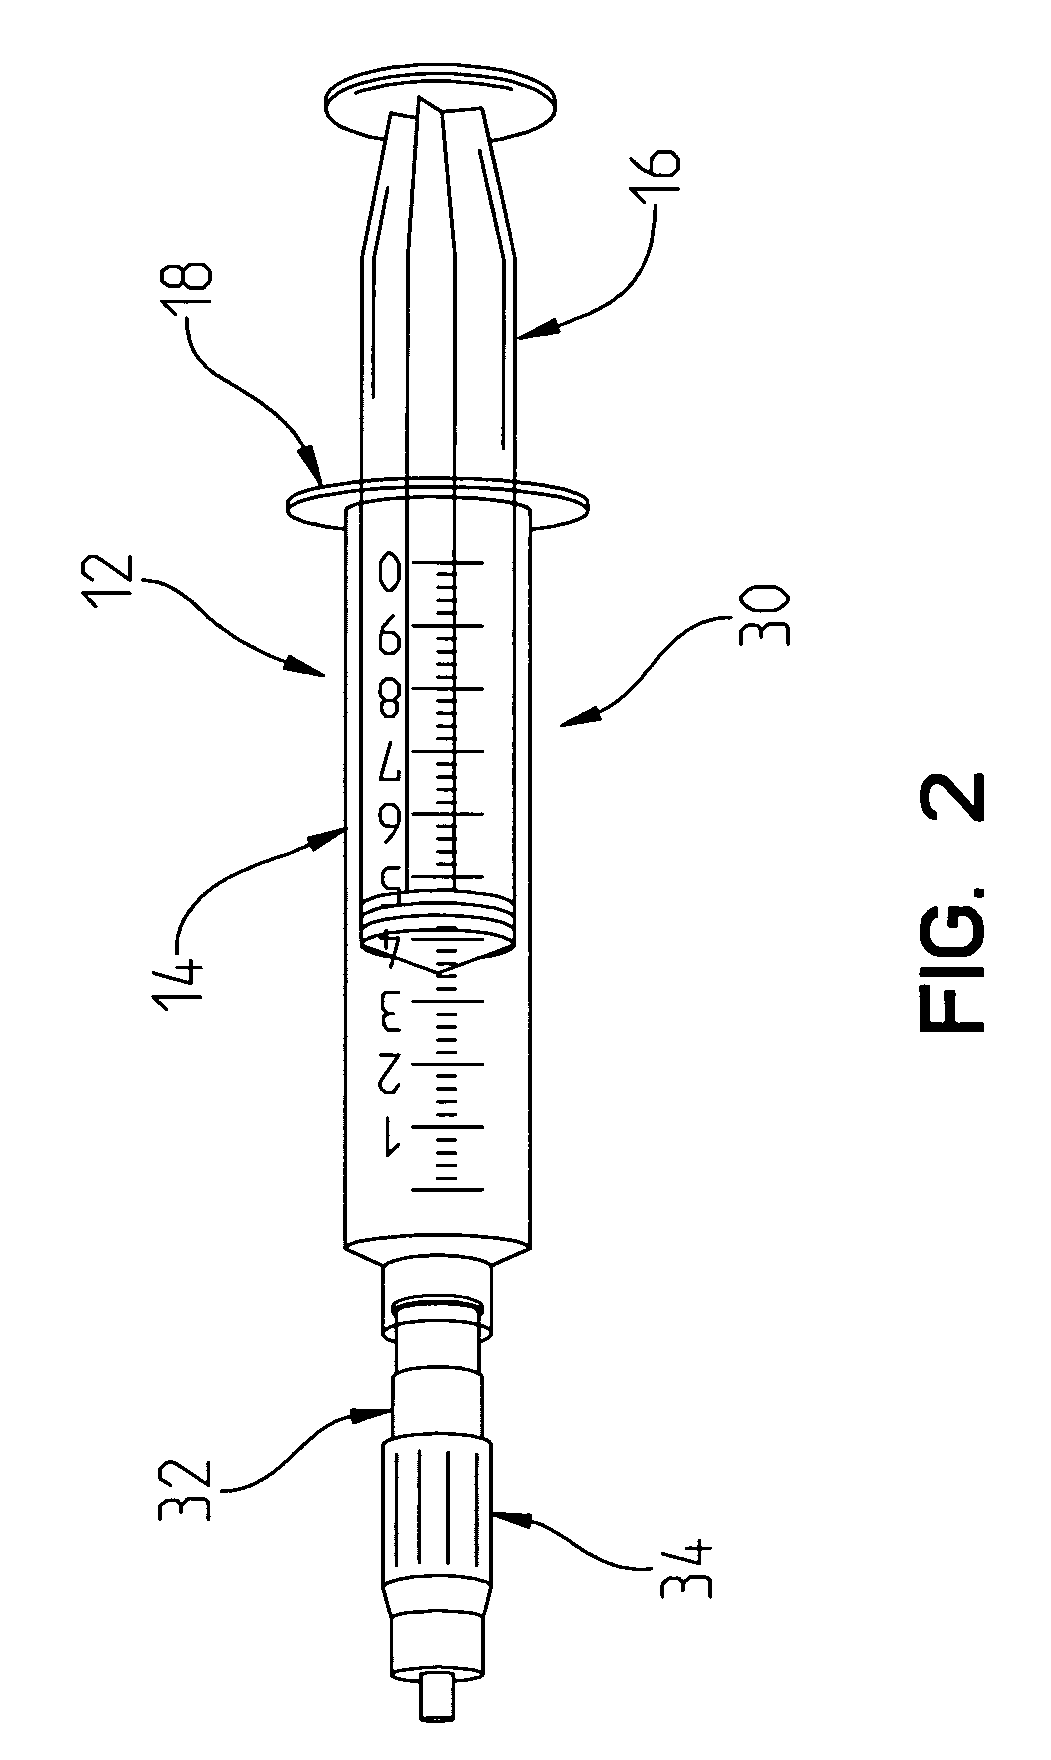 Epidural anesthetic delivery system